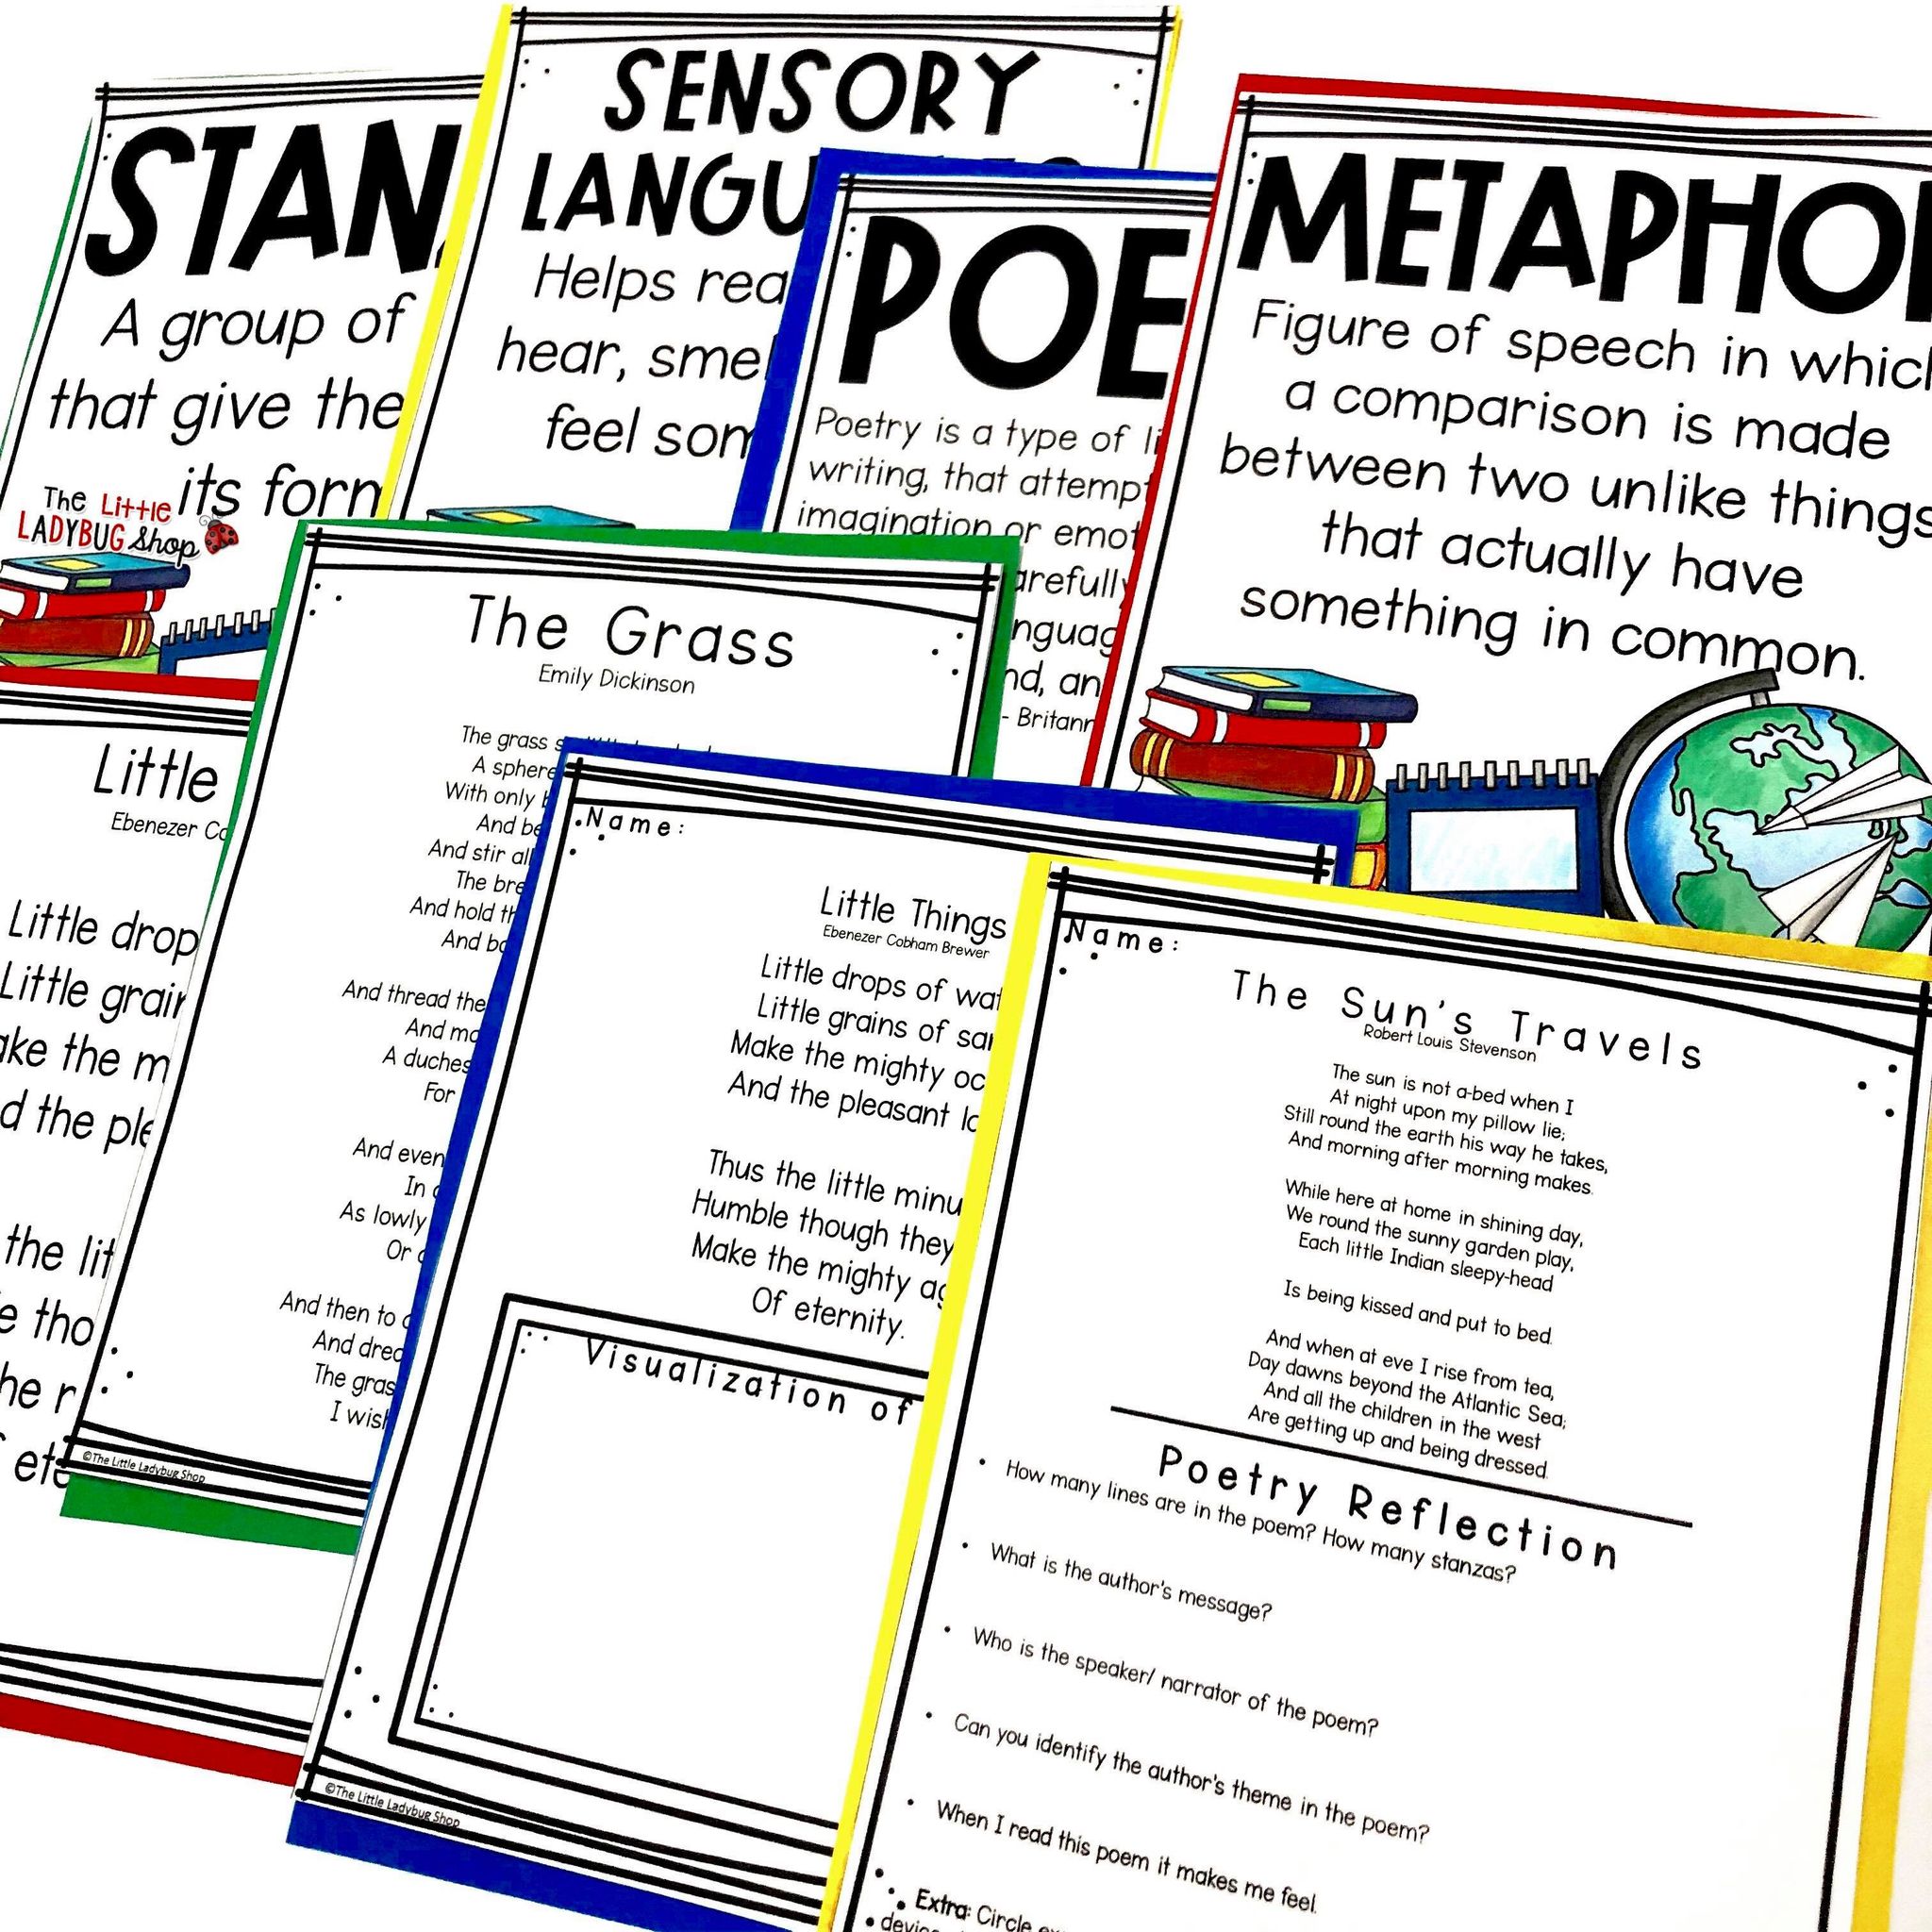 Poem of the Week Activities for Upper Elementary